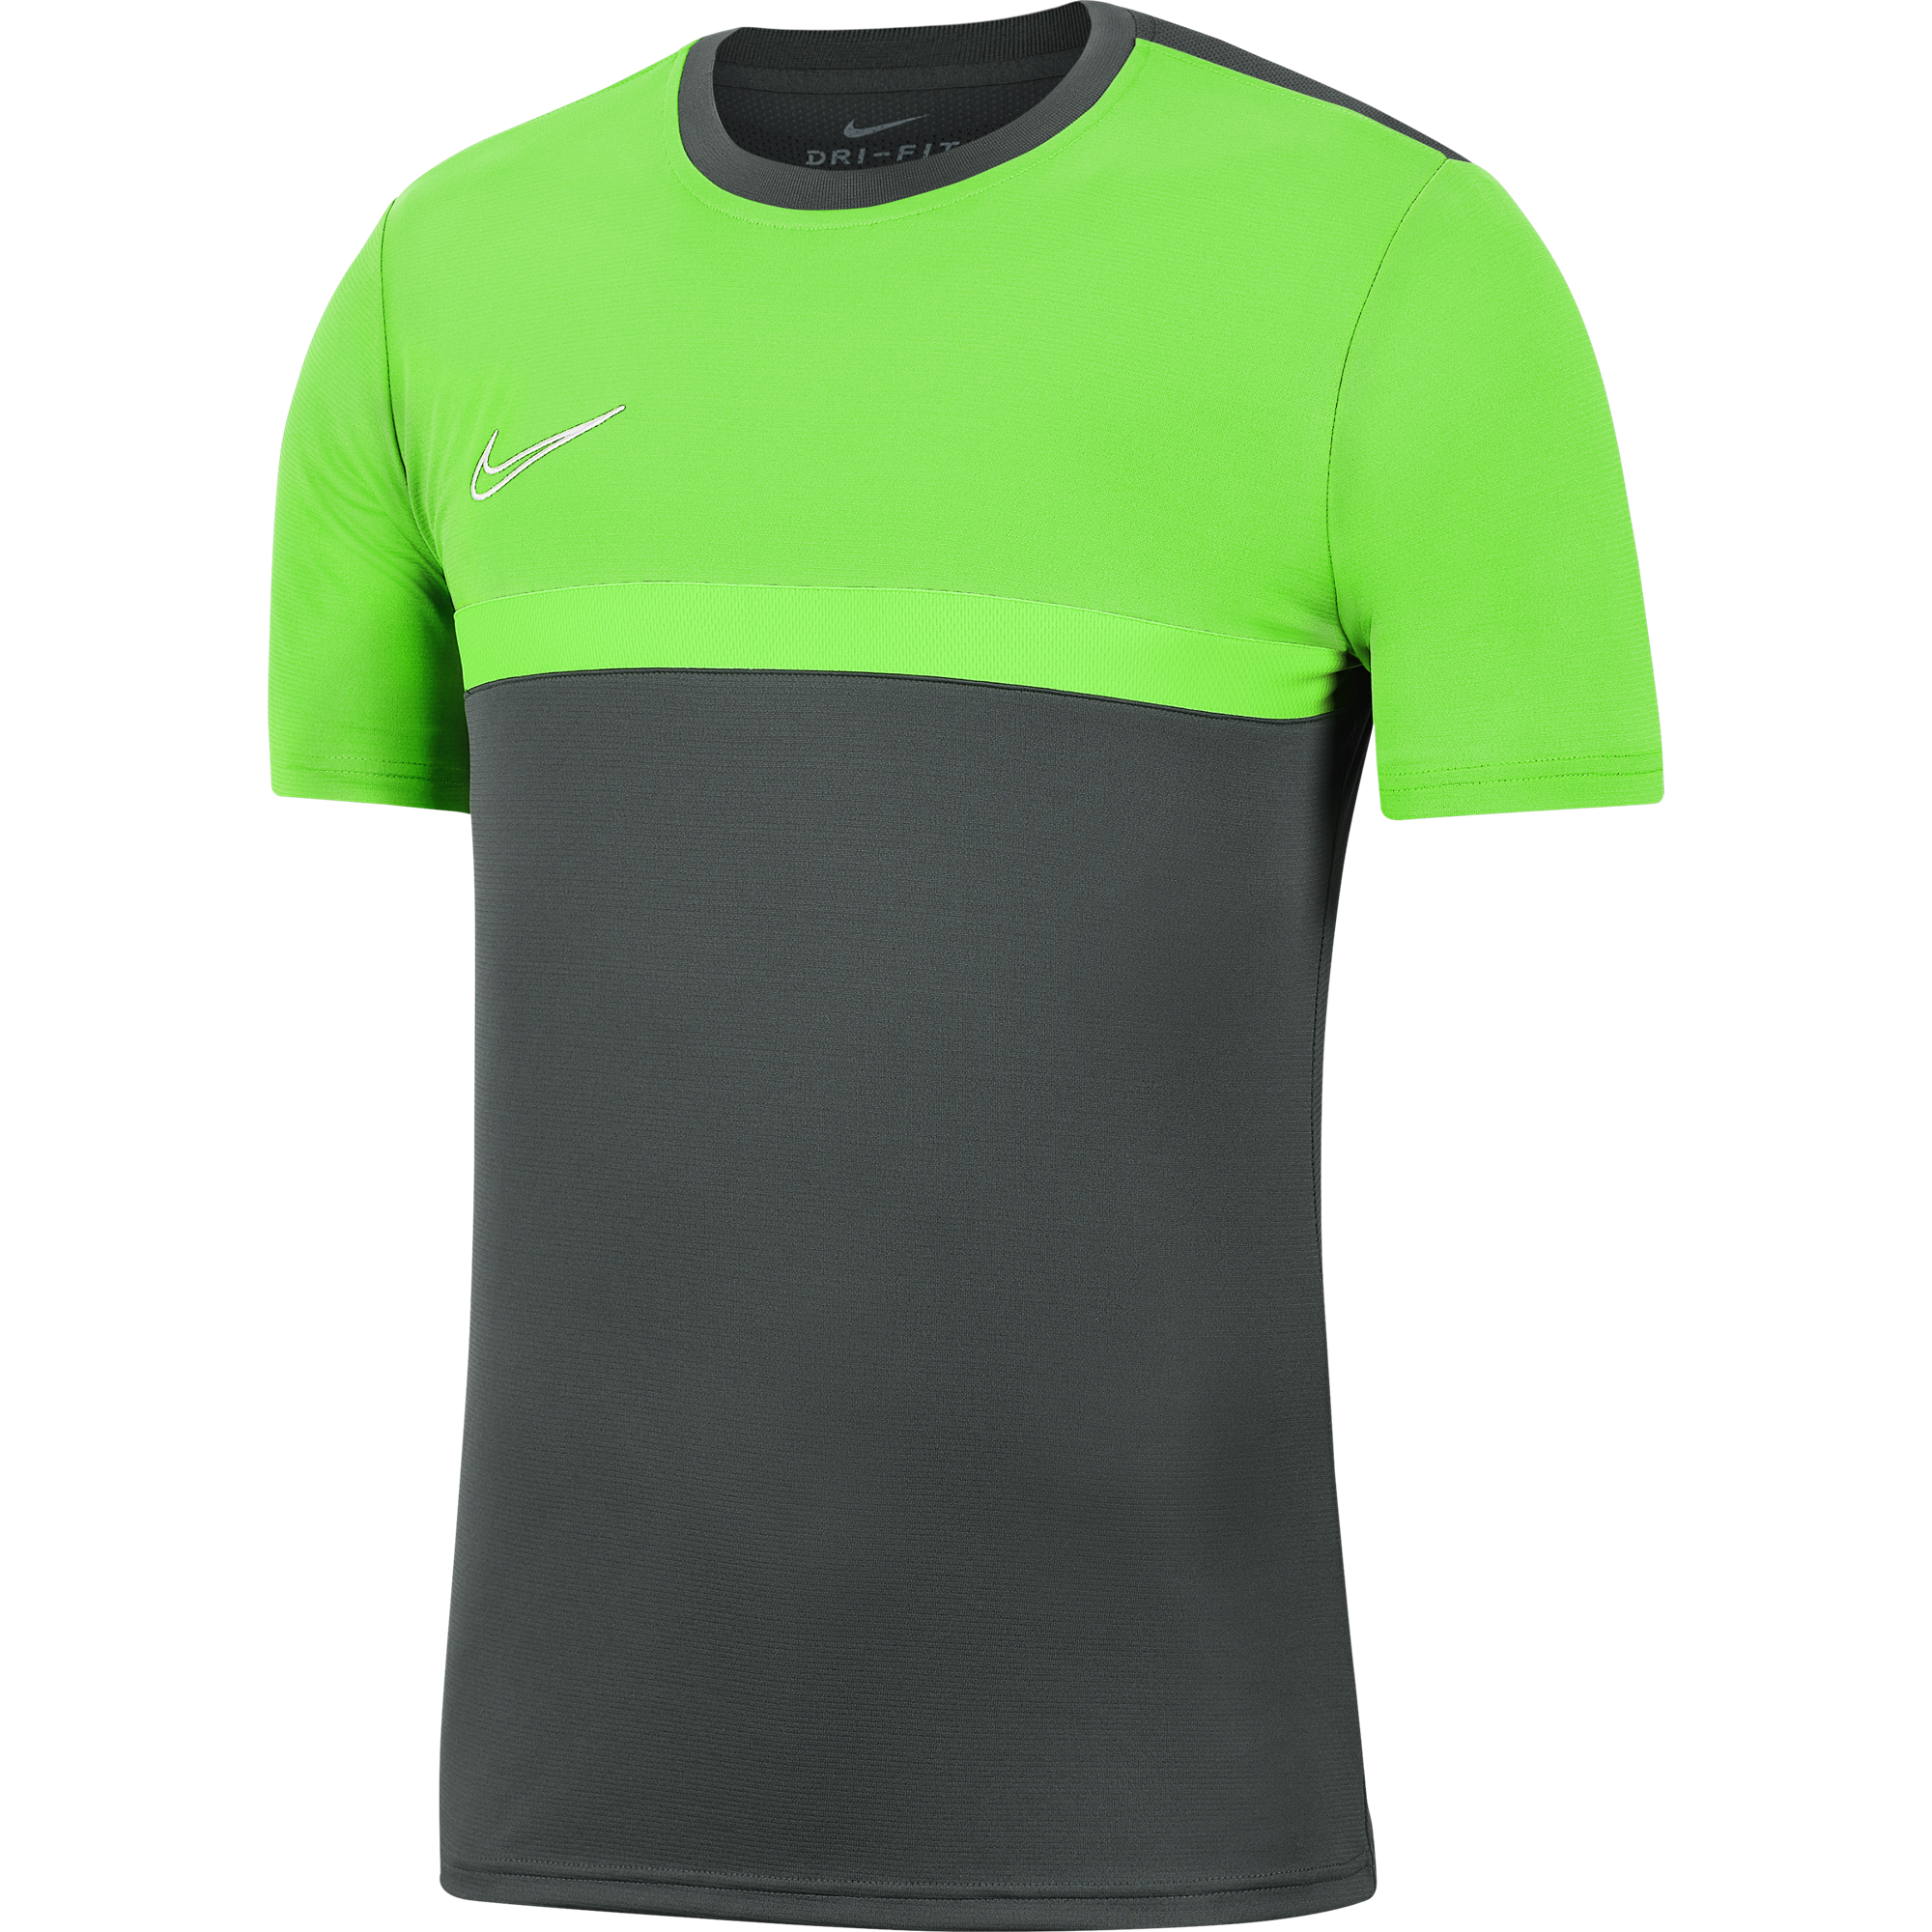 Academy Pro 20 Top (Youth)